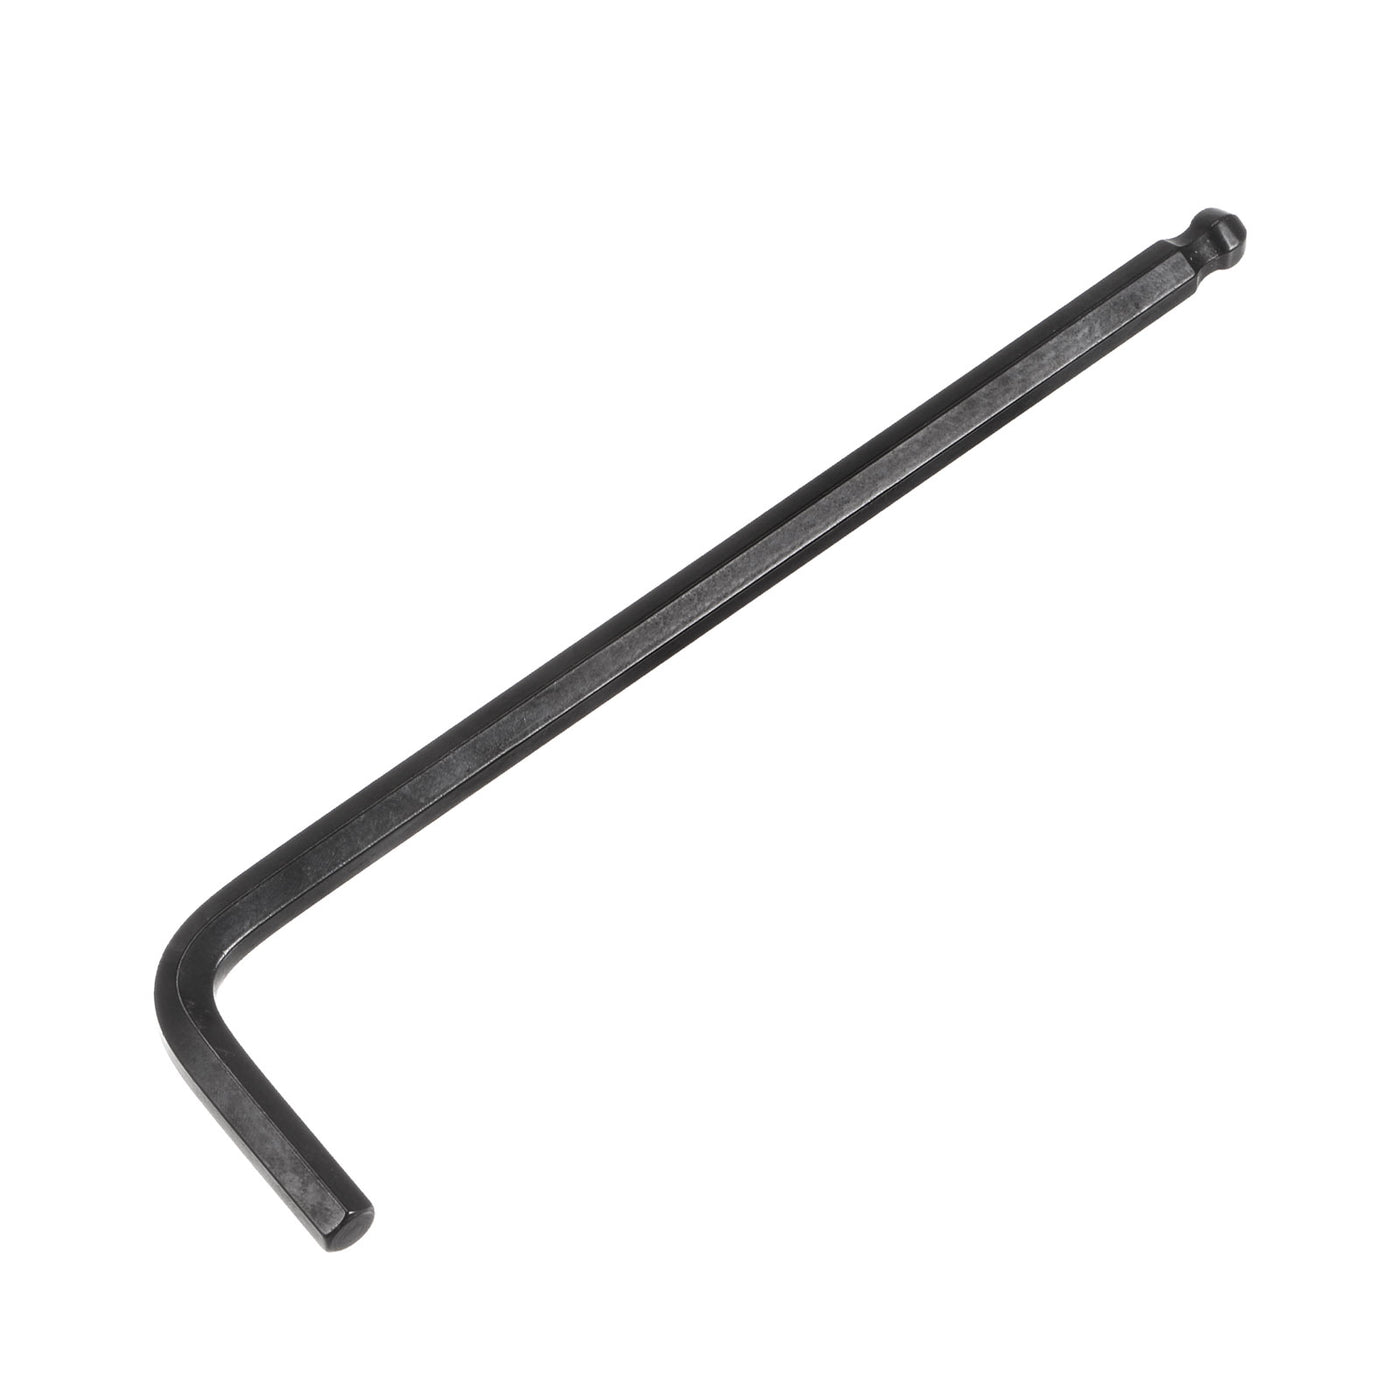 uxcell Uxcell 6mm Ball End Hex Key Wrench, L Shaped Long Arm CR-V Repairing Tool, Black